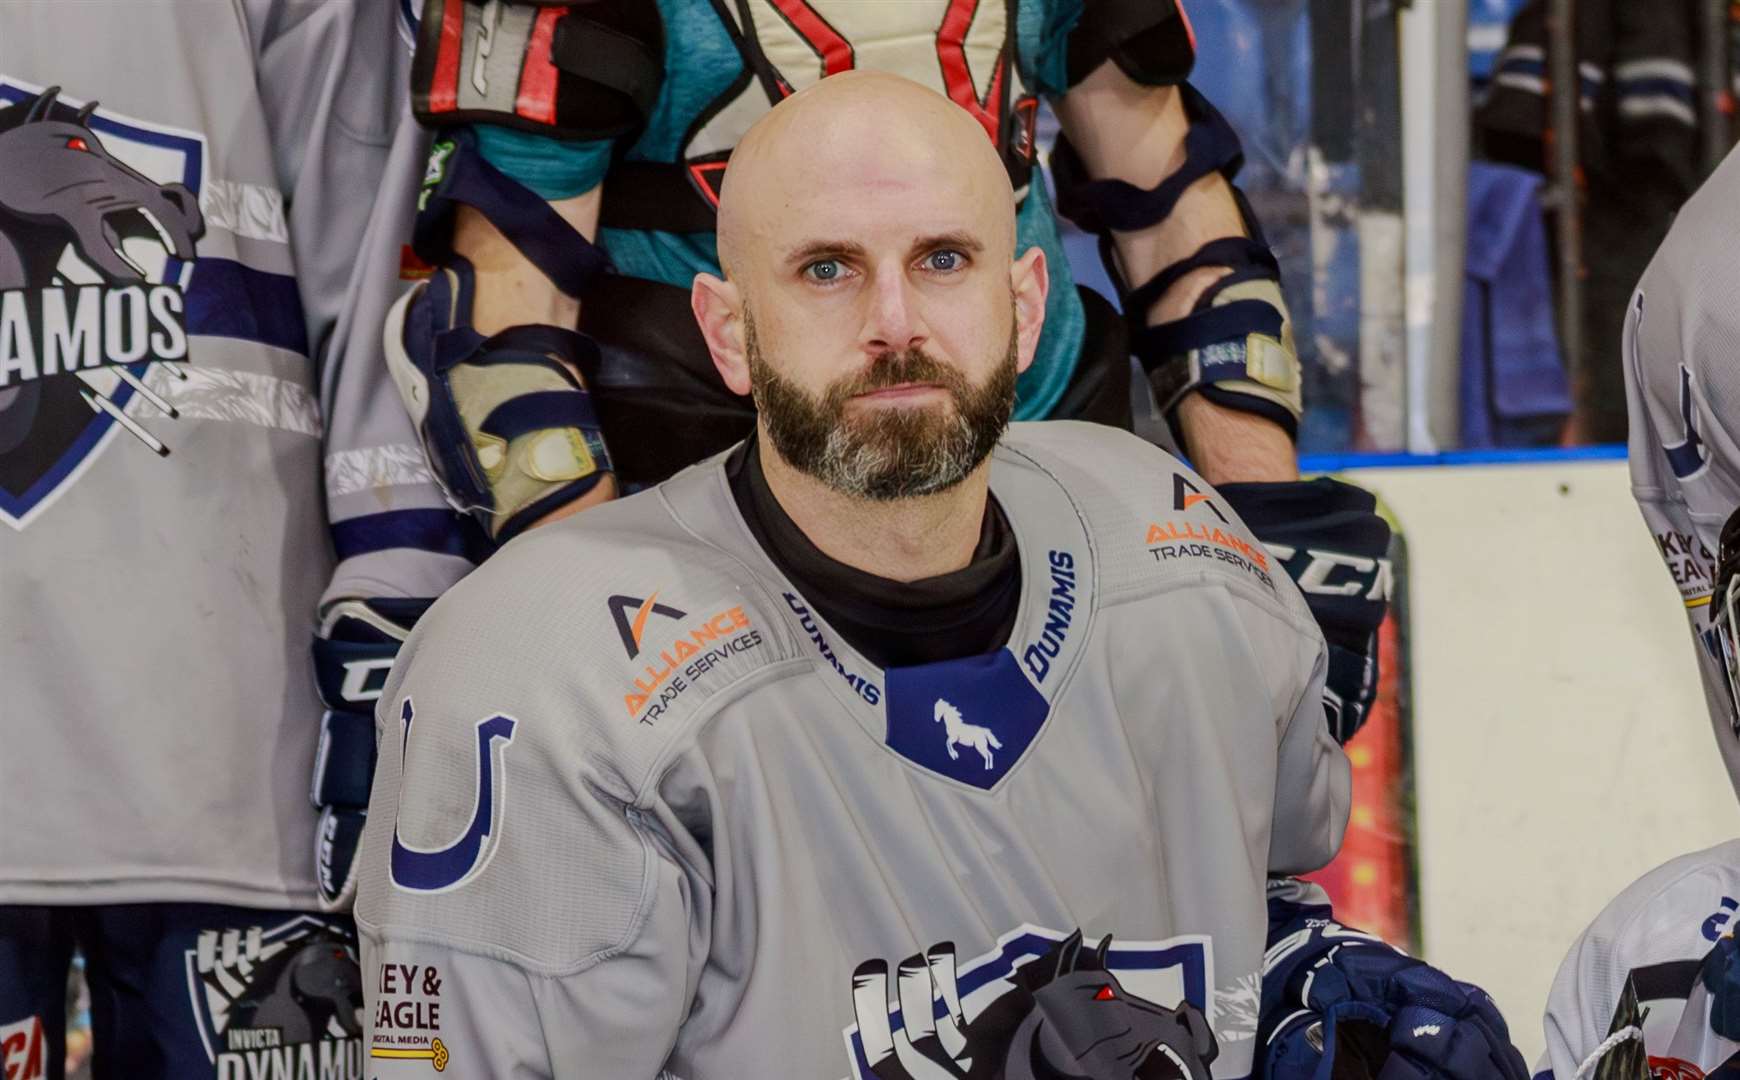 Head coach Karl Lennon played for Invicta Dynamos against Romford Buccaneers last weekend Picture: David Trevallion